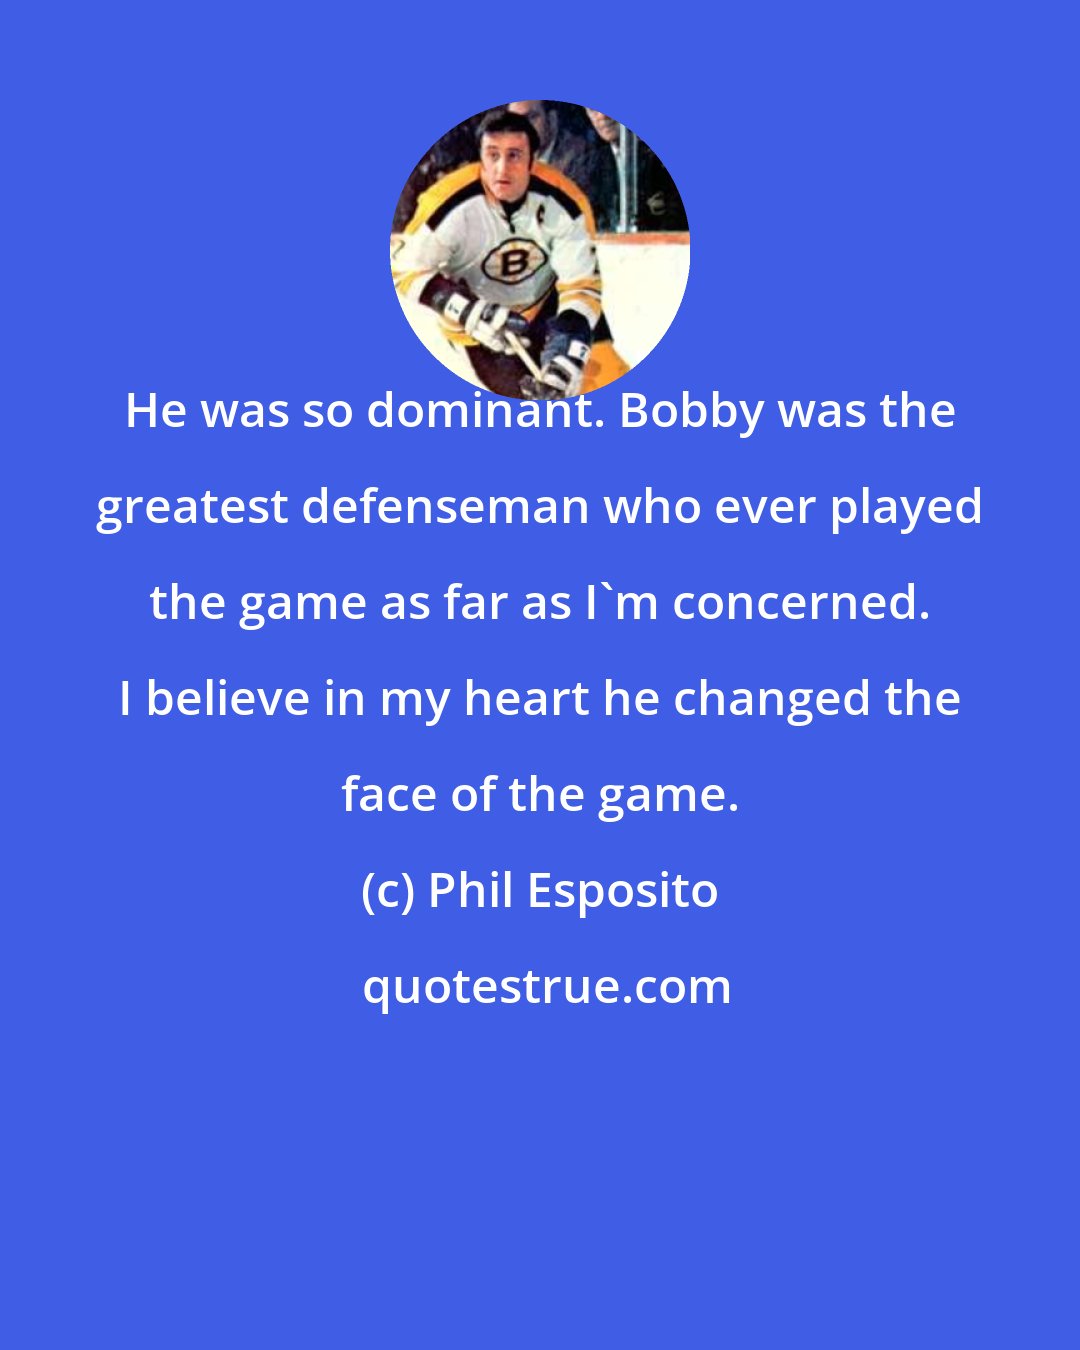 Phil Esposito: He was so dominant. Bobby was the greatest defenseman who ever played the game as far as I'm concerned. I believe in my heart he changed the face of the game.